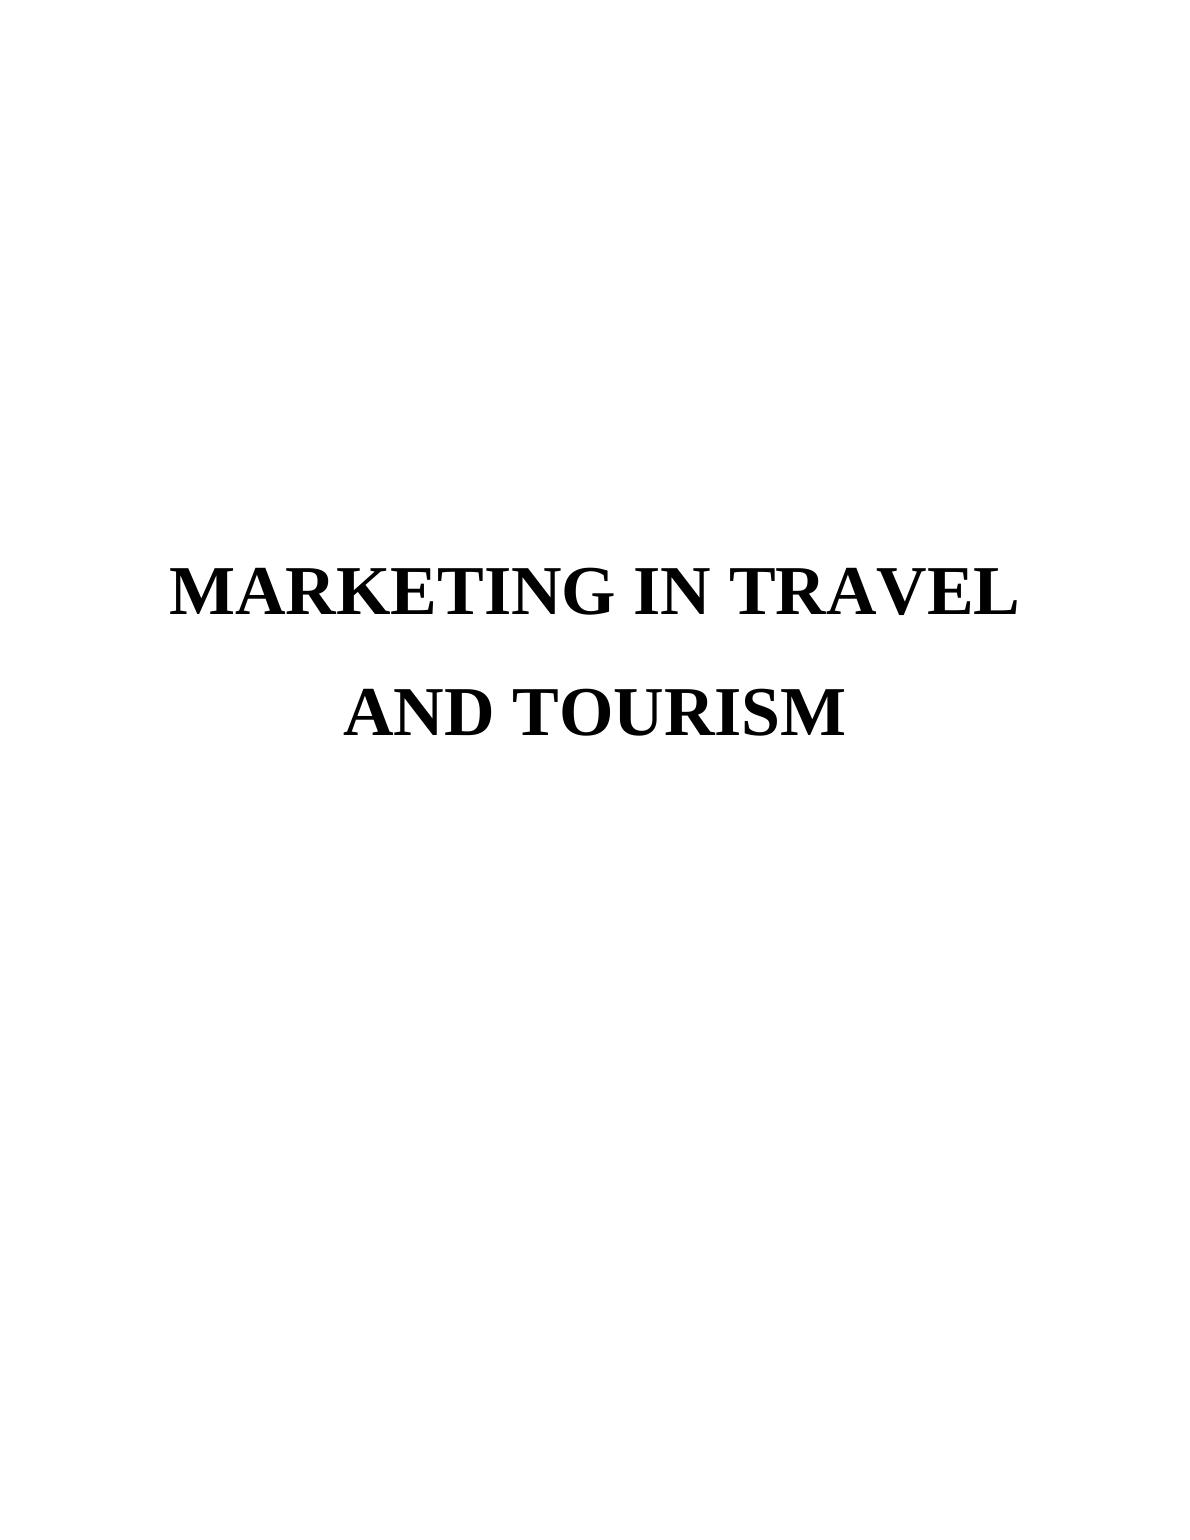 MARKETING IN TRAVEL AND TOURISM TABLE OF CONTENTS INTRODUCTION_1